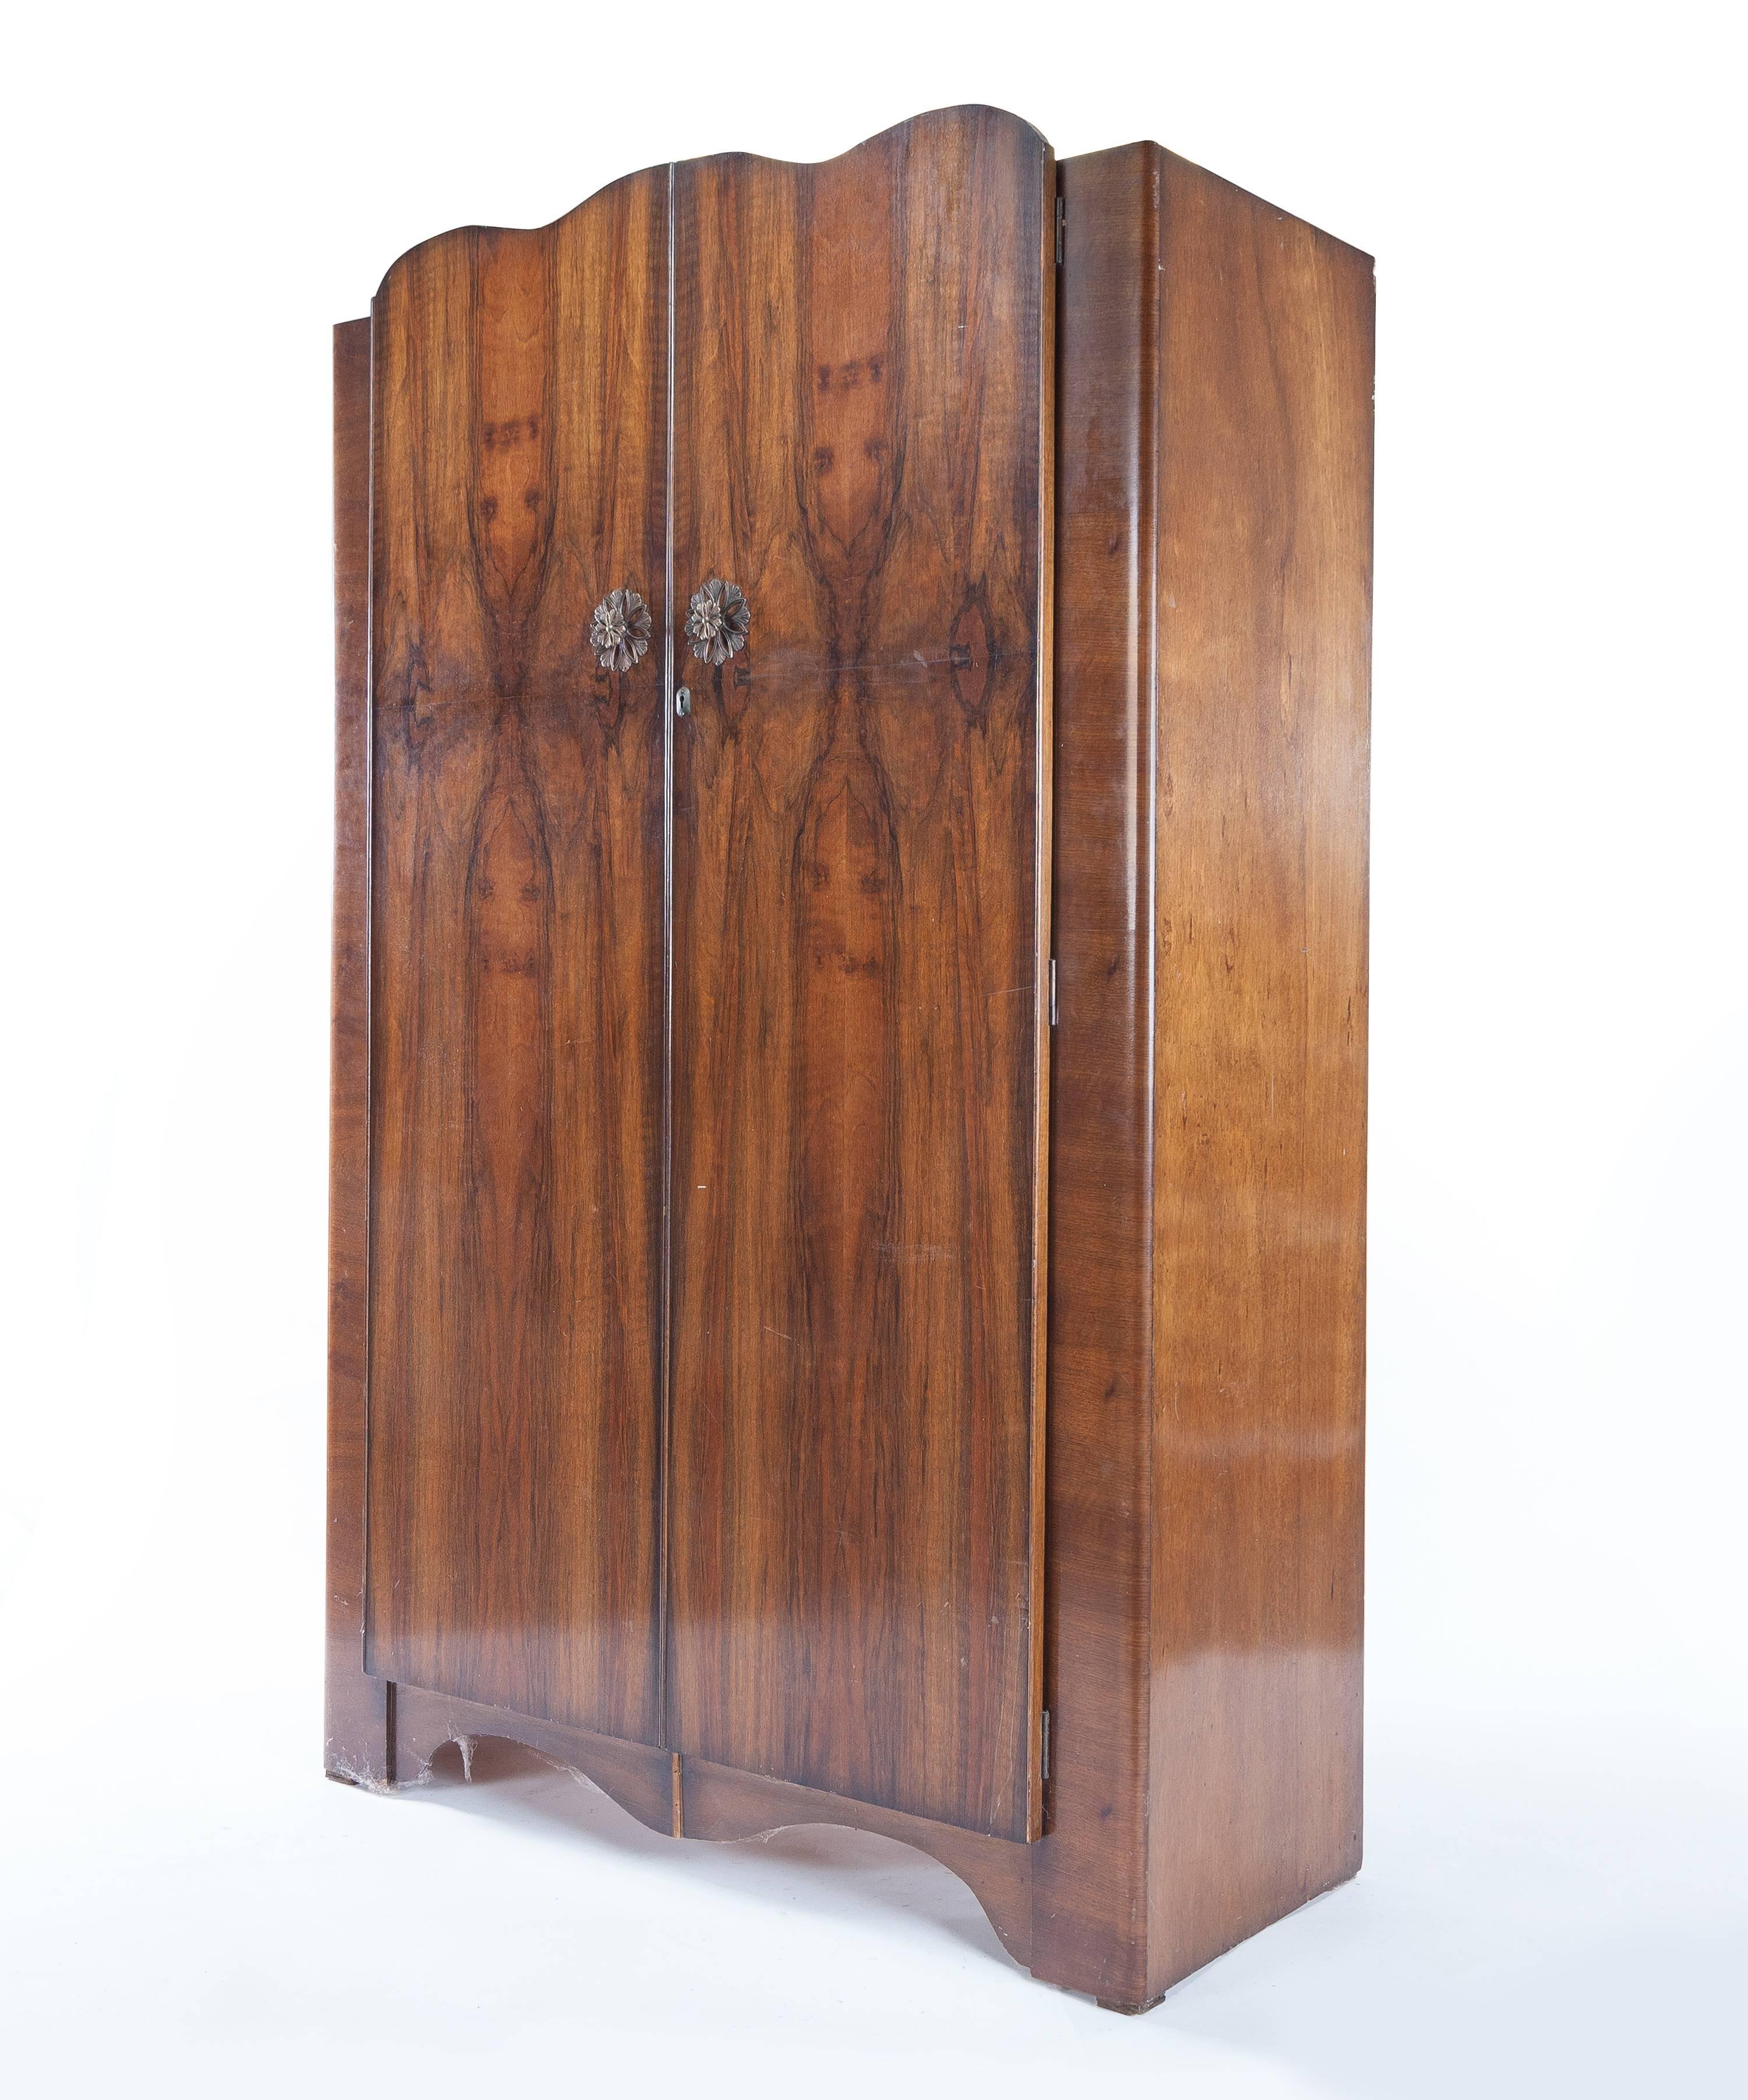 An English Mid-Century Modern deco armoire. It features a beautiful book match veneer. The armoire measures approximately 48